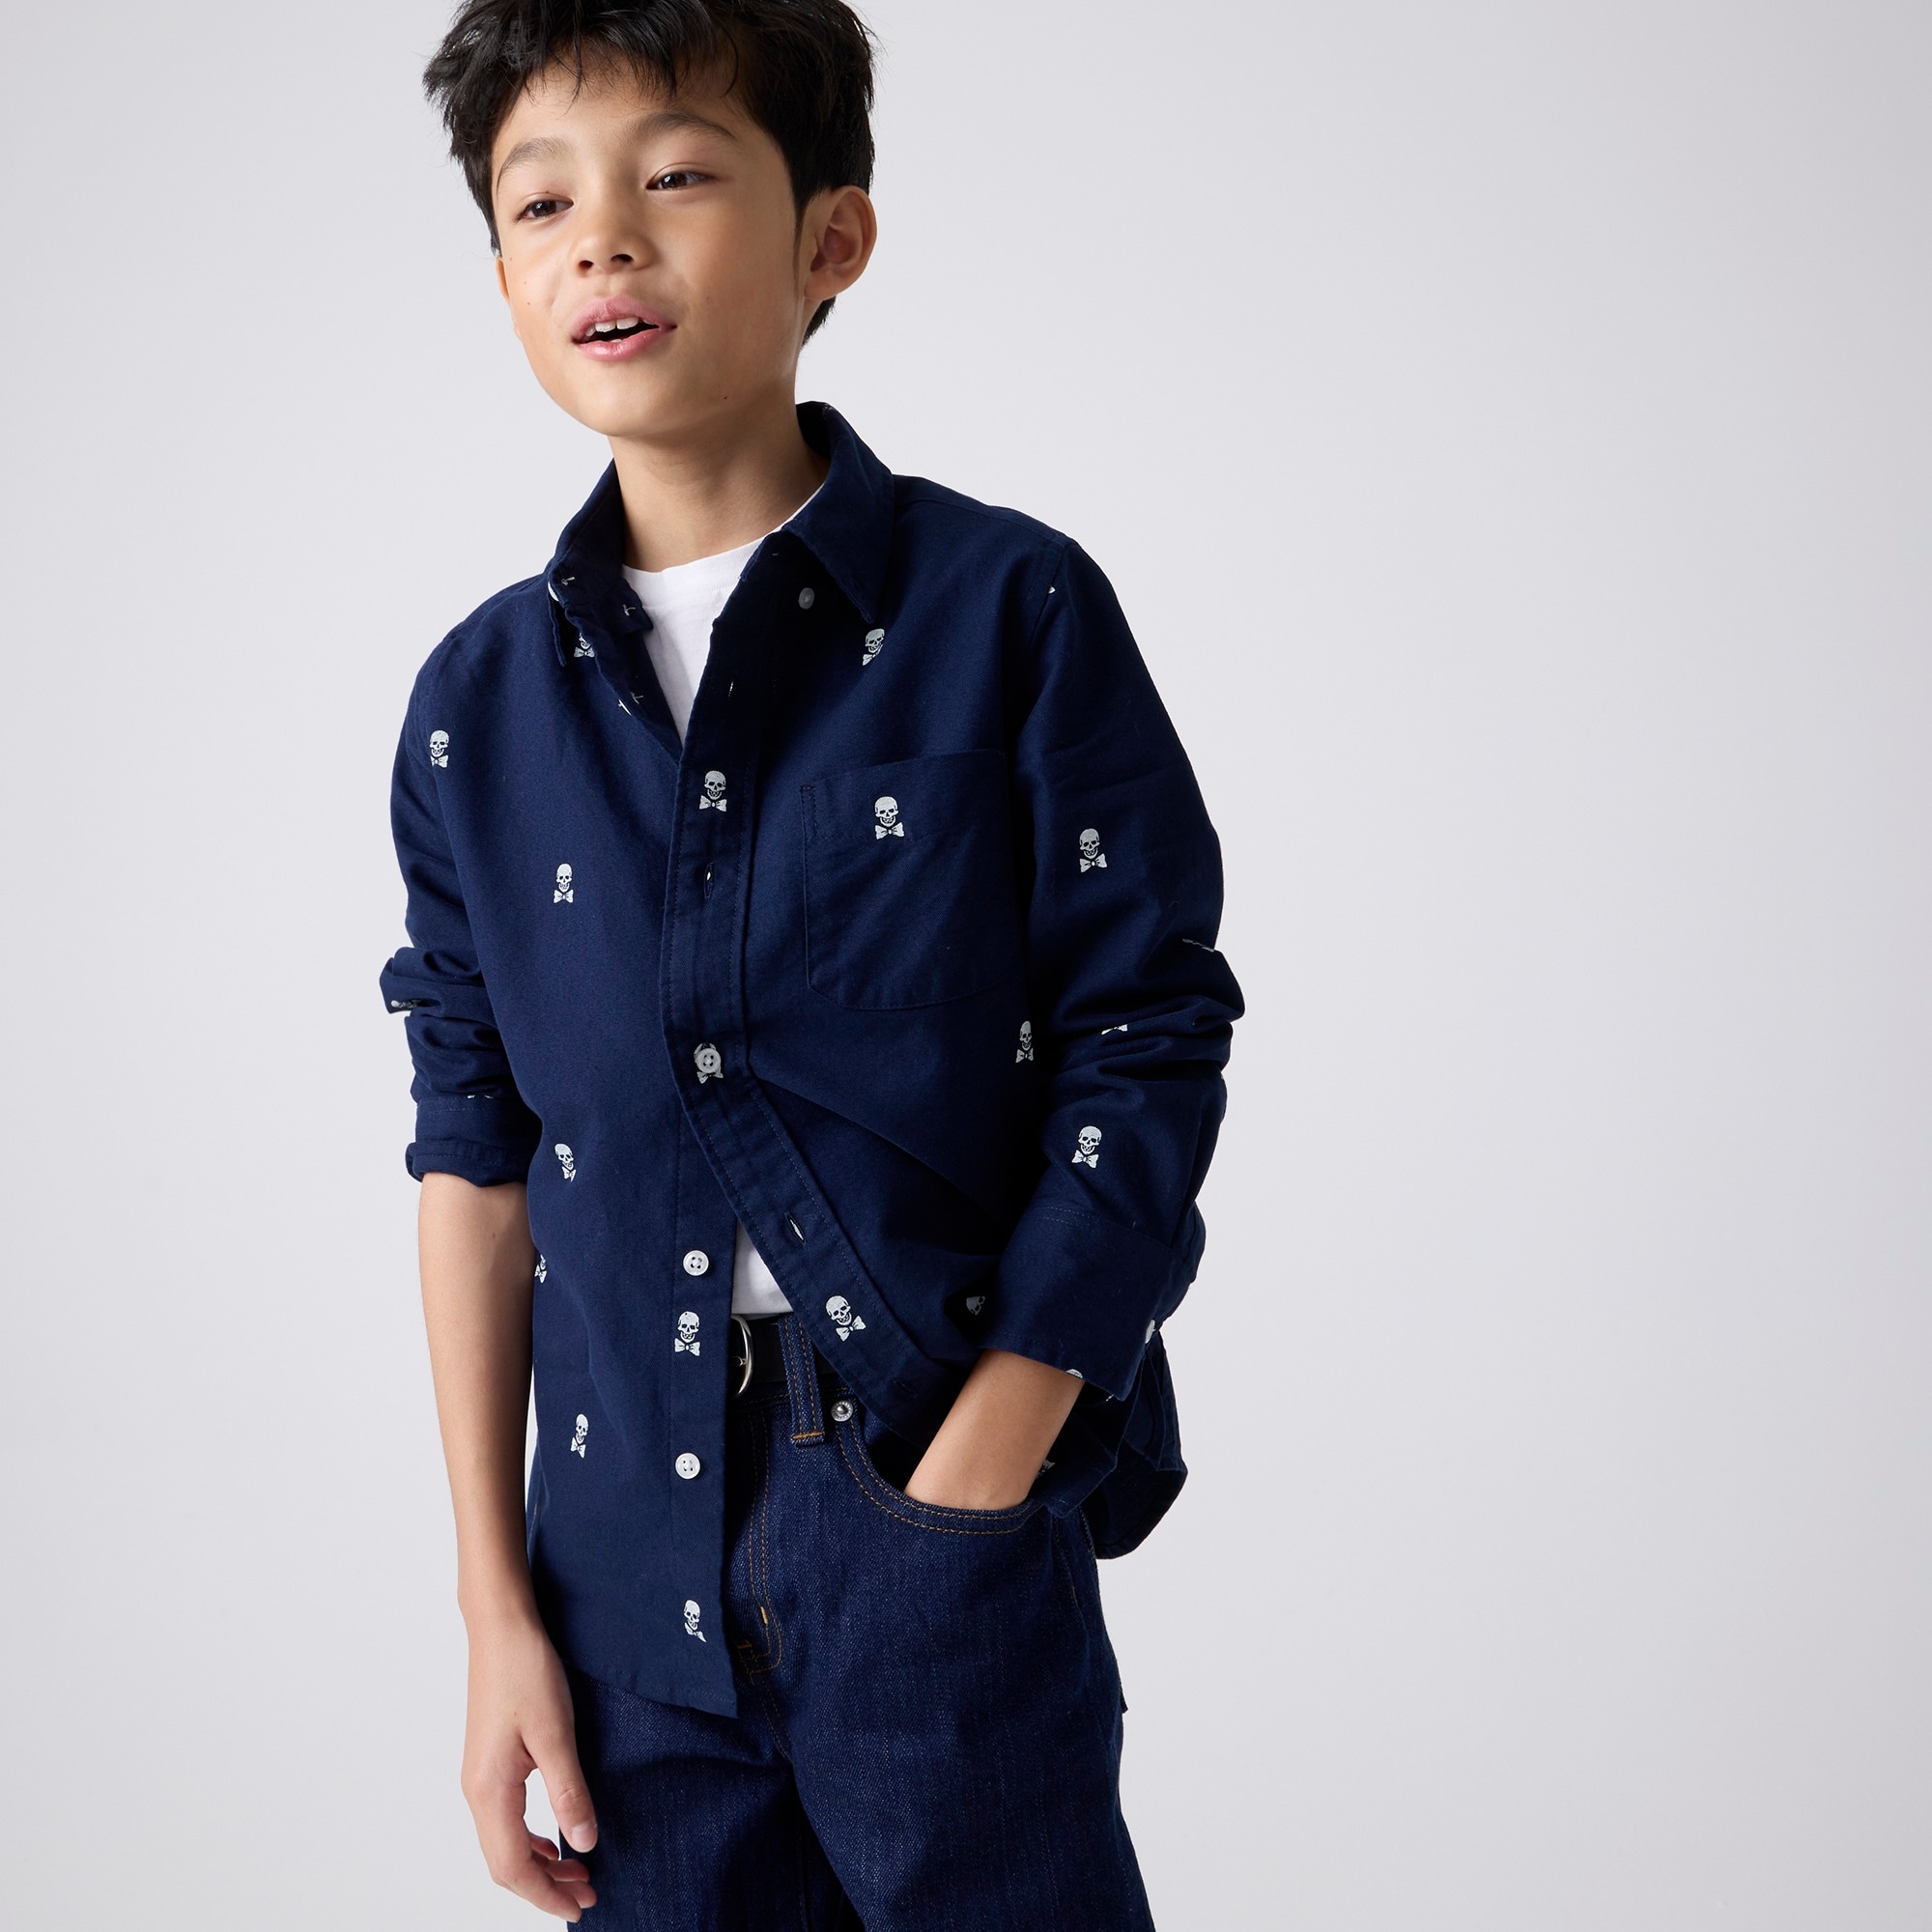 Jcrew Boys oxford shirt with embroidery